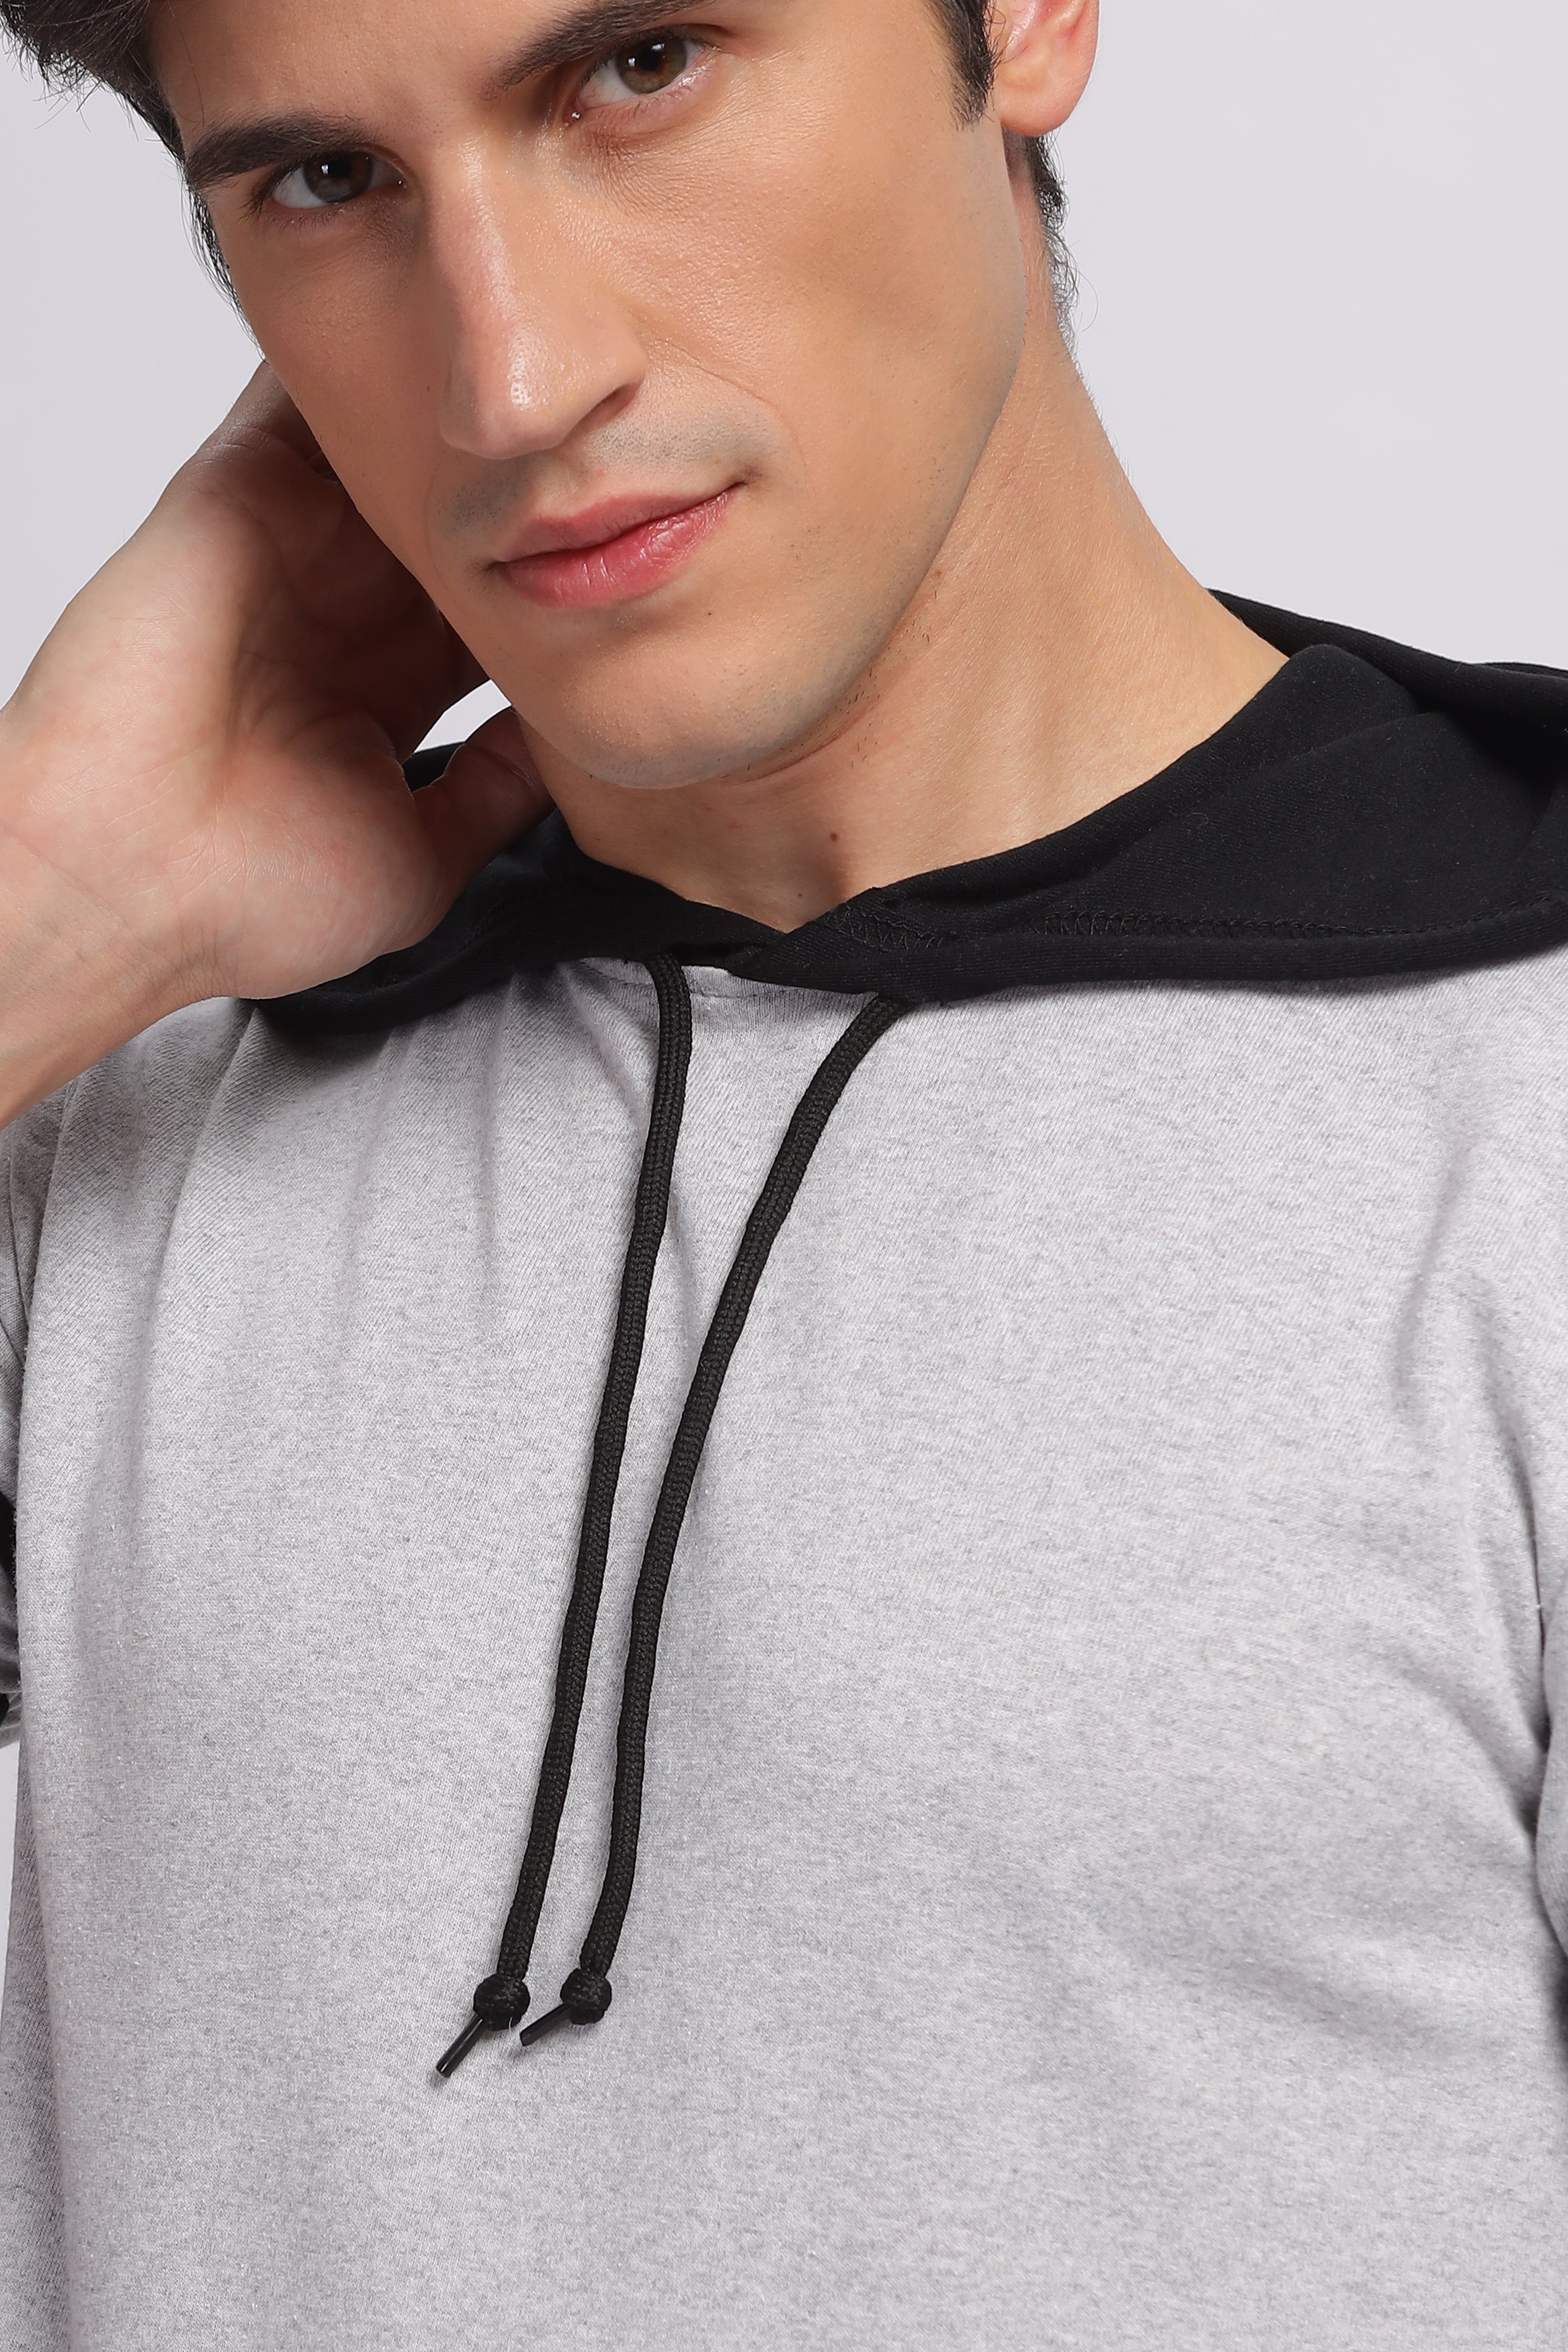 Grey Colorblocked Cotton Hooded T-Shirt